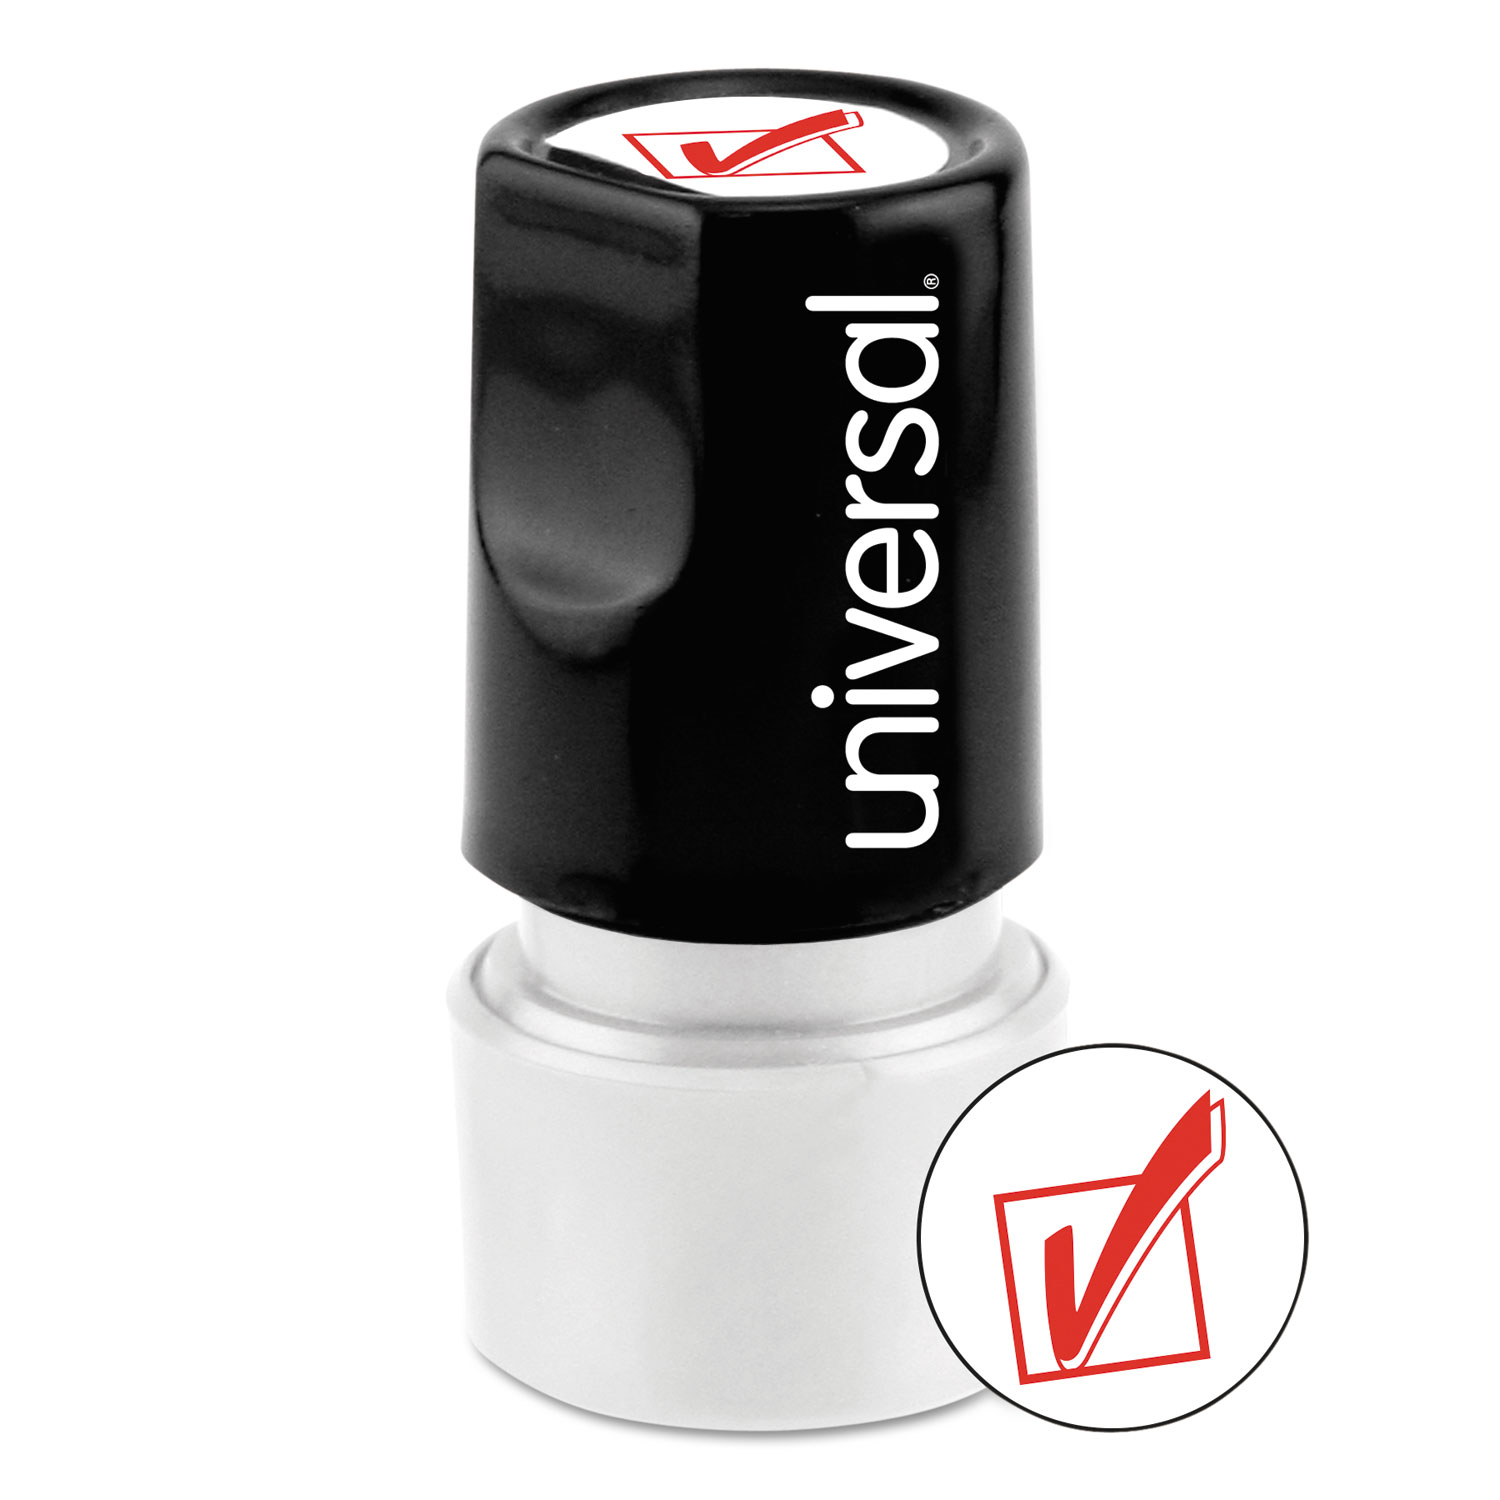  Universal UNV10075 Round Message Stamp, CHECK MARK, Pre-Inked/Re-Inkable, Red (UNV10075) 